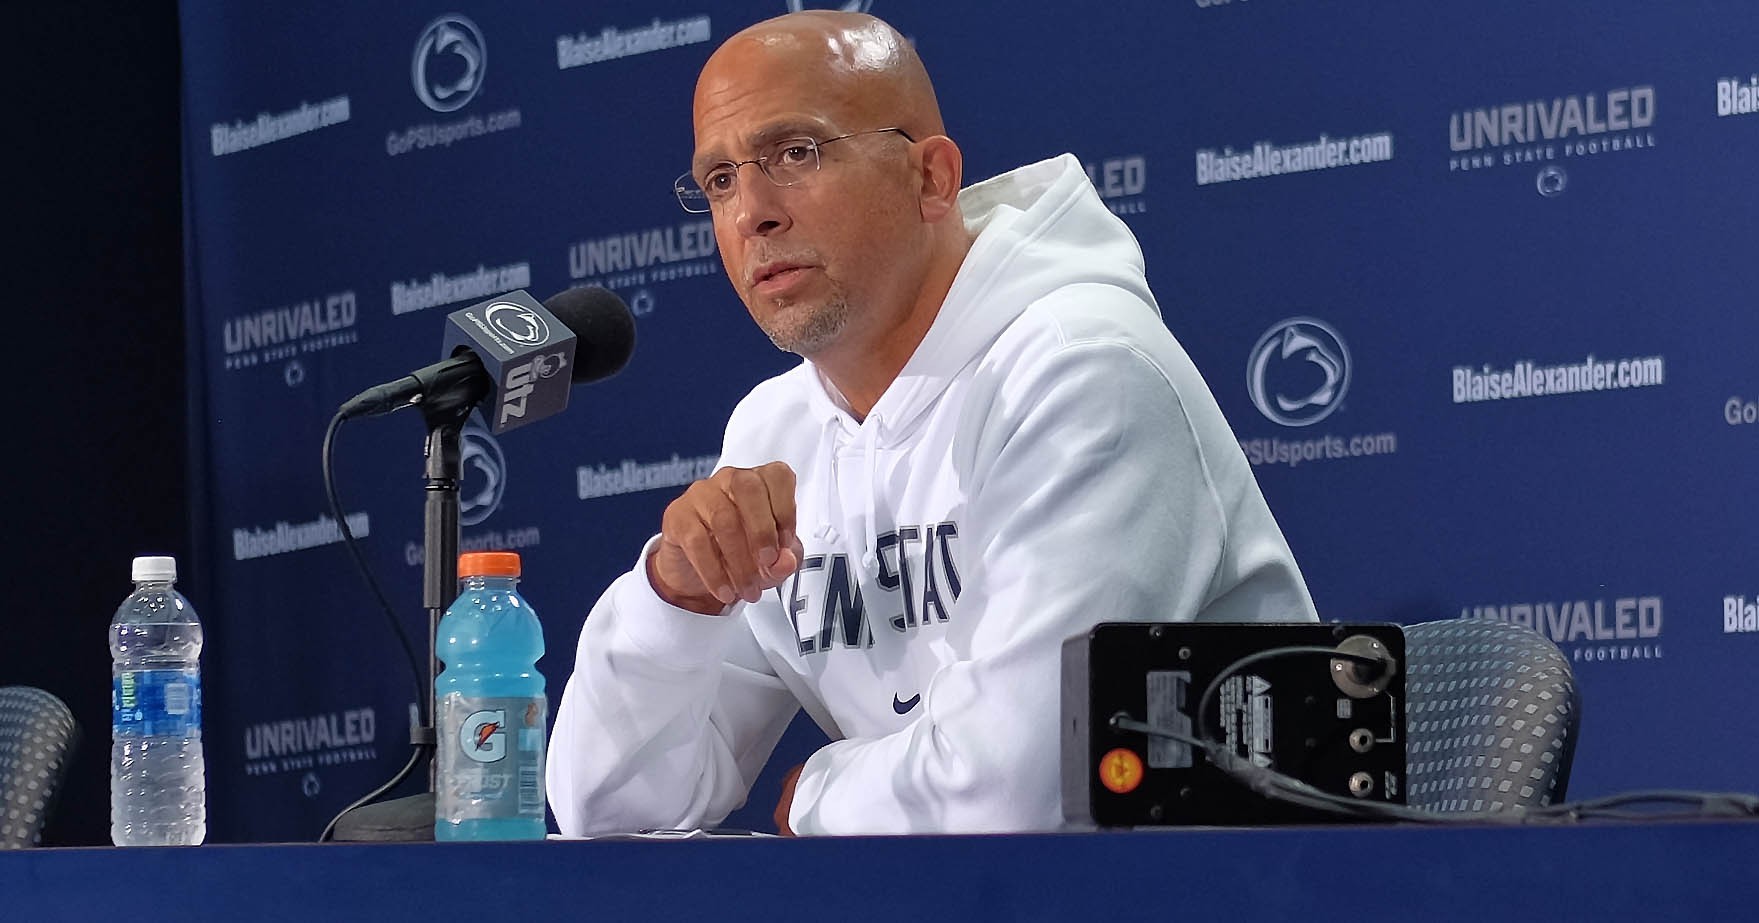 james-franklin-press-conference-penn-state-football-on3